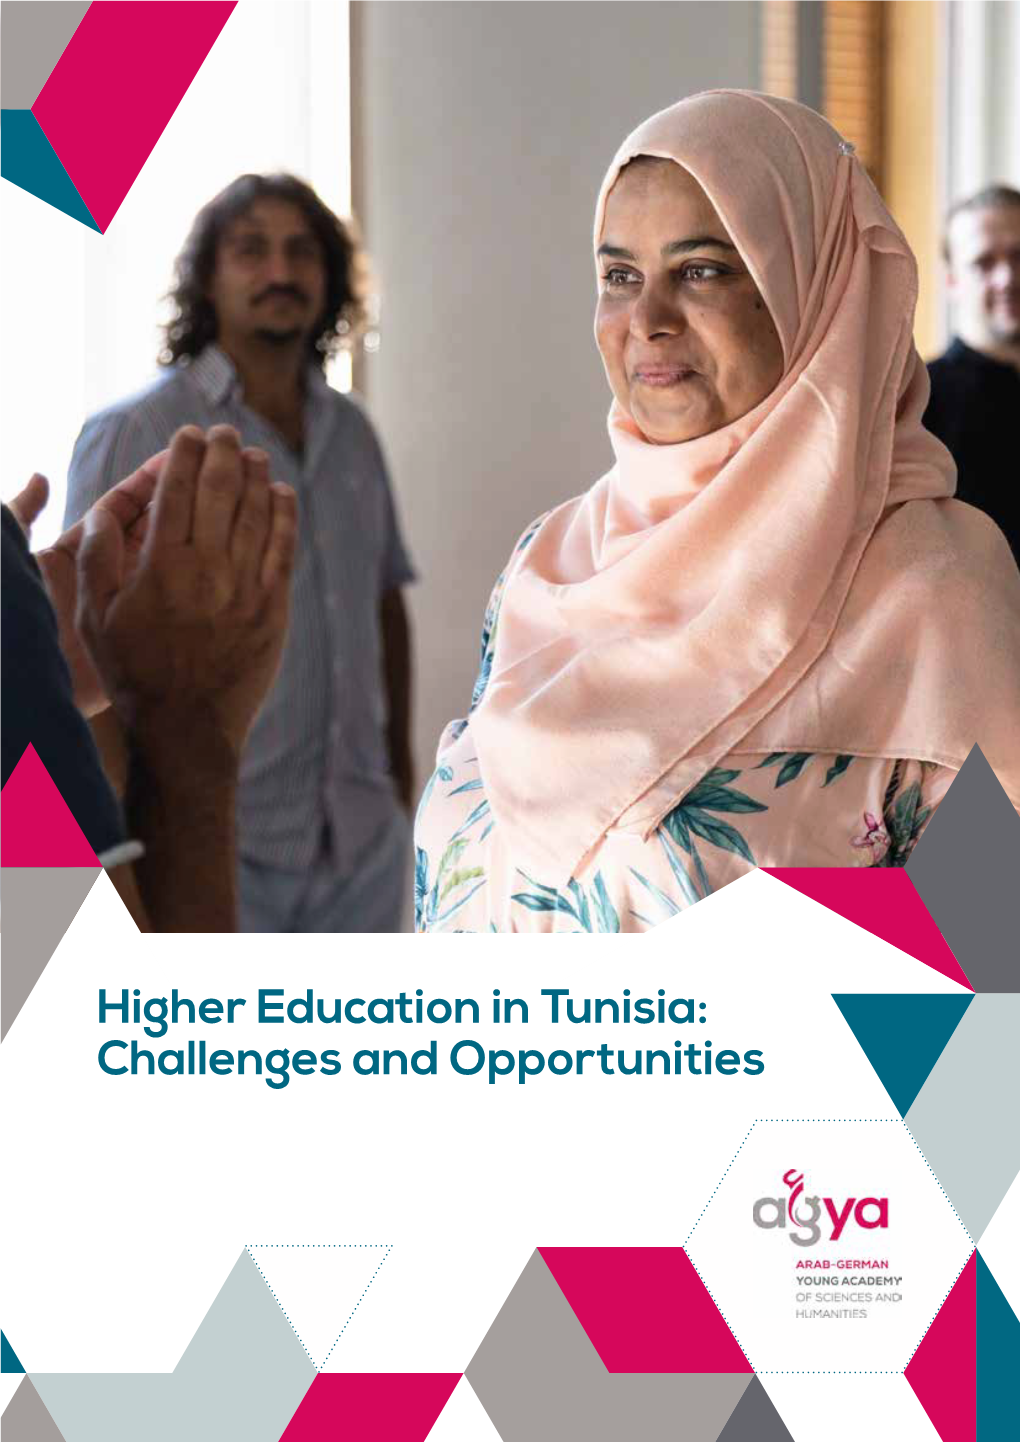 Higher Education in Tunisia: Challenges and Opportunities 2